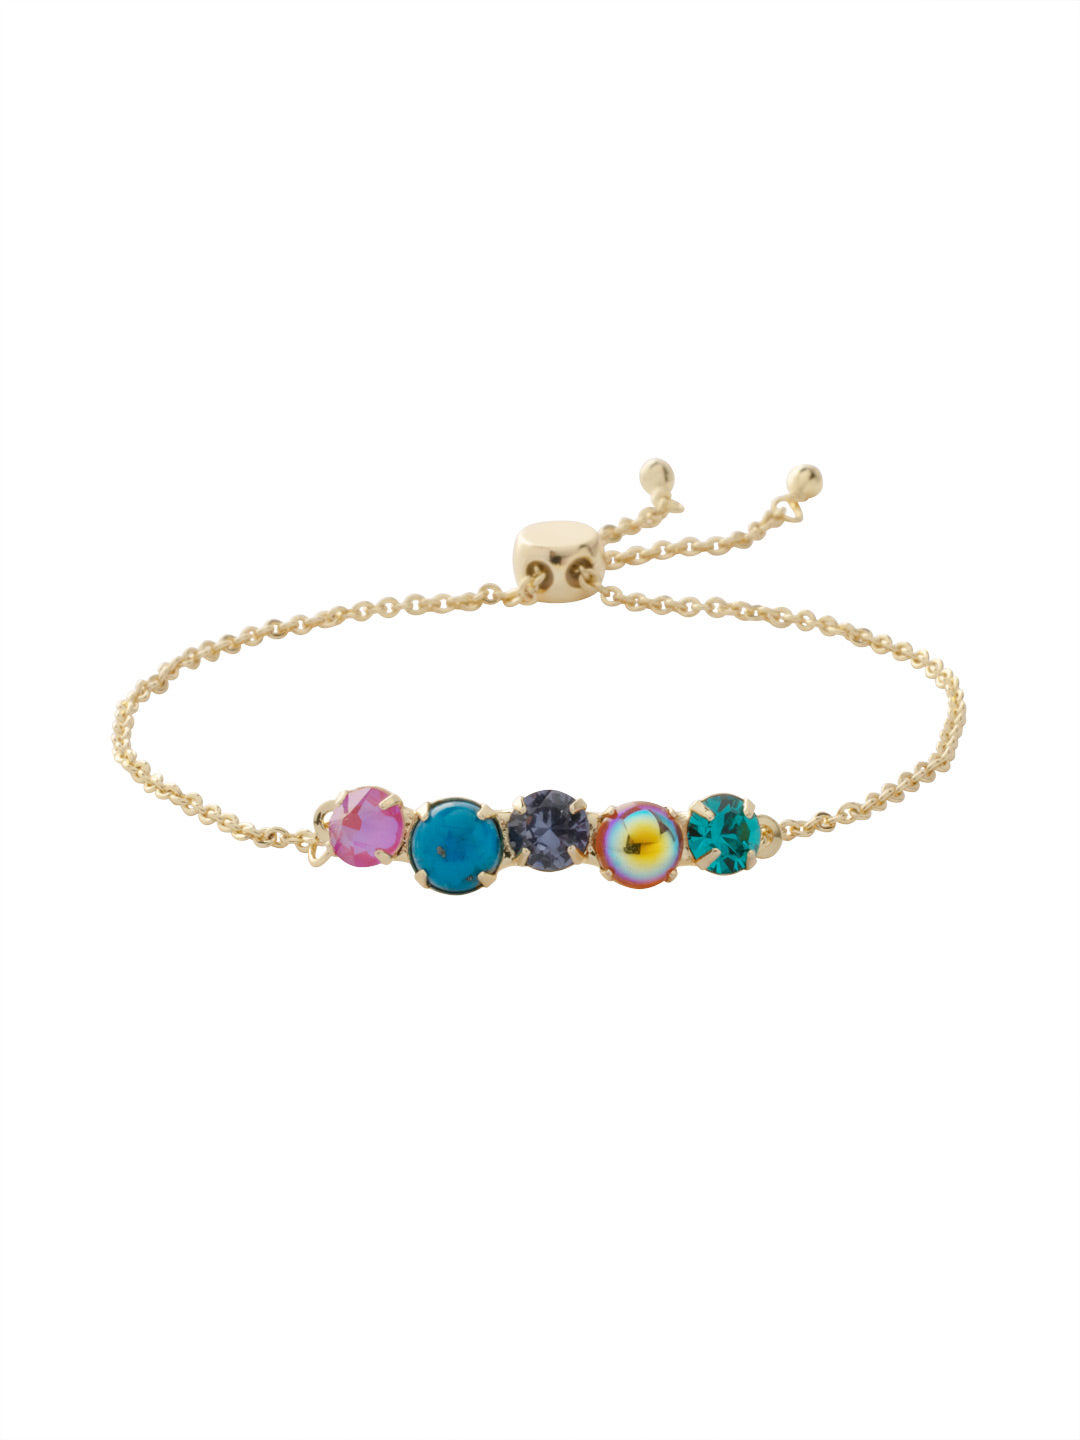 Xena Slider Bracelet - BFF1BGHBR - <p>The Xena Slider Bracelet features a line of round semi-precious stones on a delicate adjustable chain. From Sorrelli's Happy Birthday Redux collection in our Bright Gold-tone finish.</p>